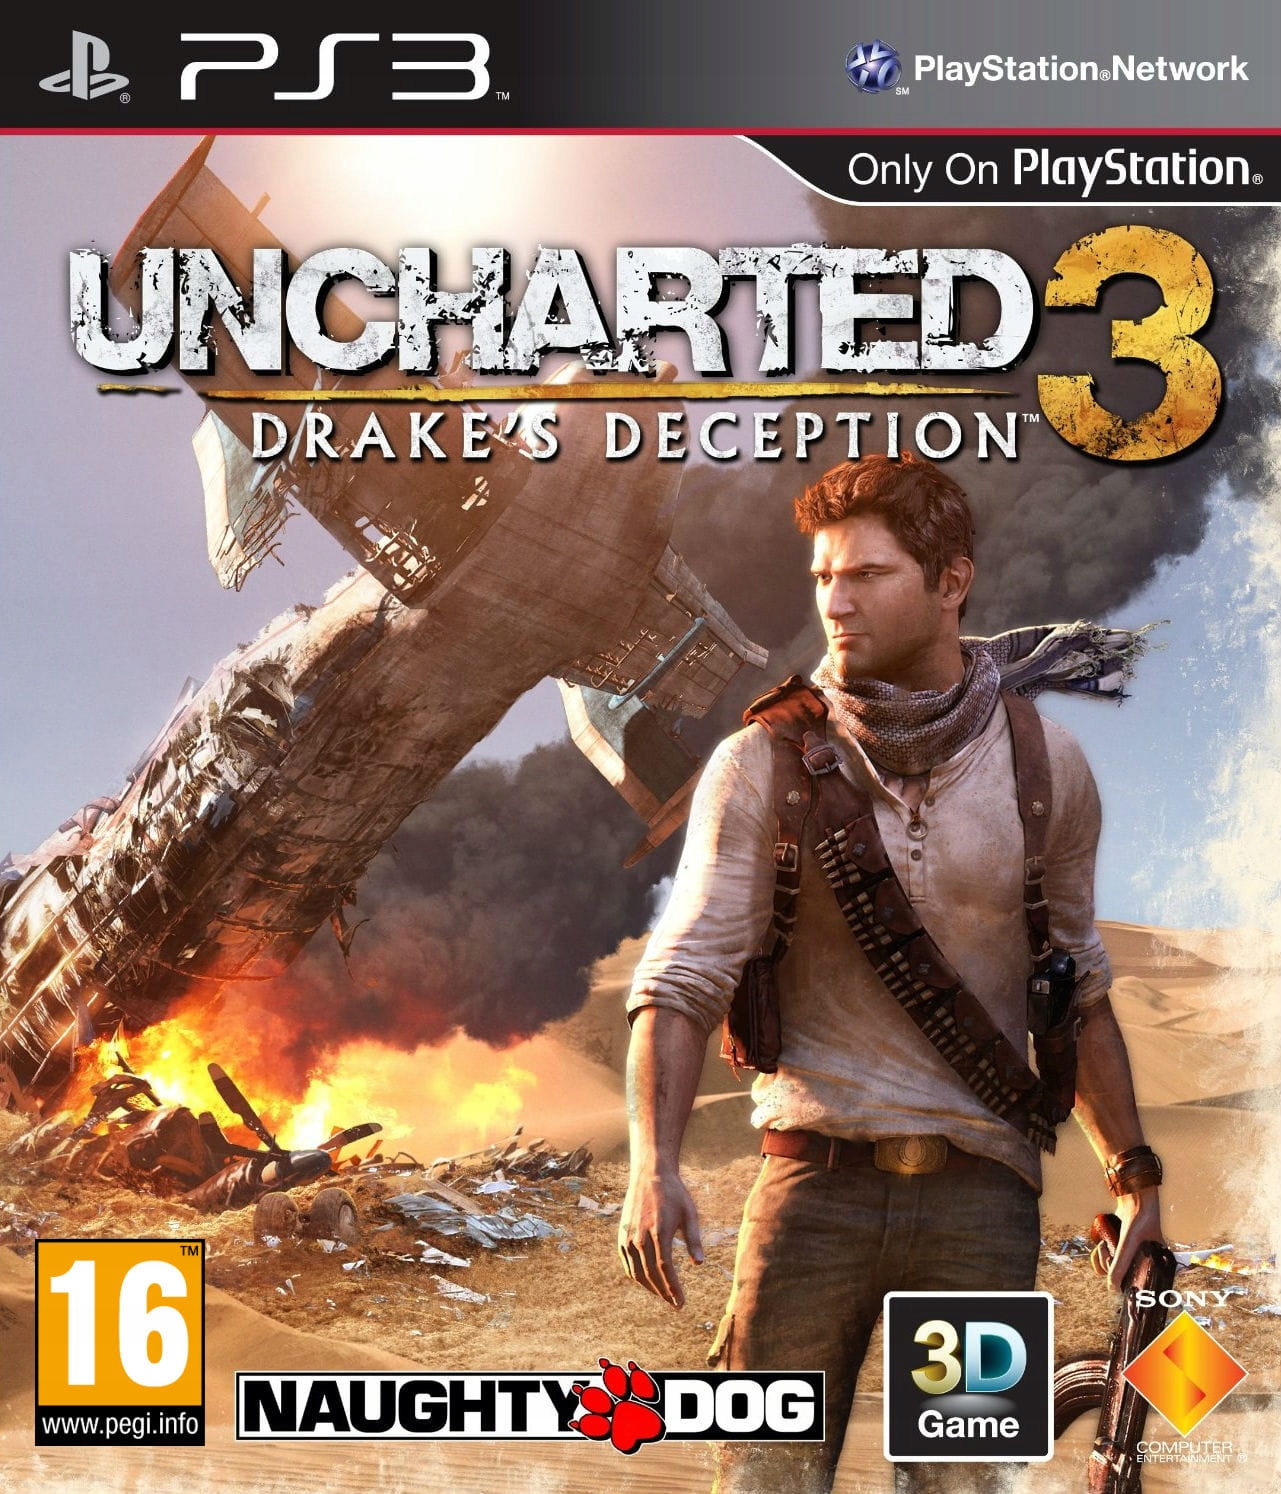 Uncharted 3 Drake's Deception B1017